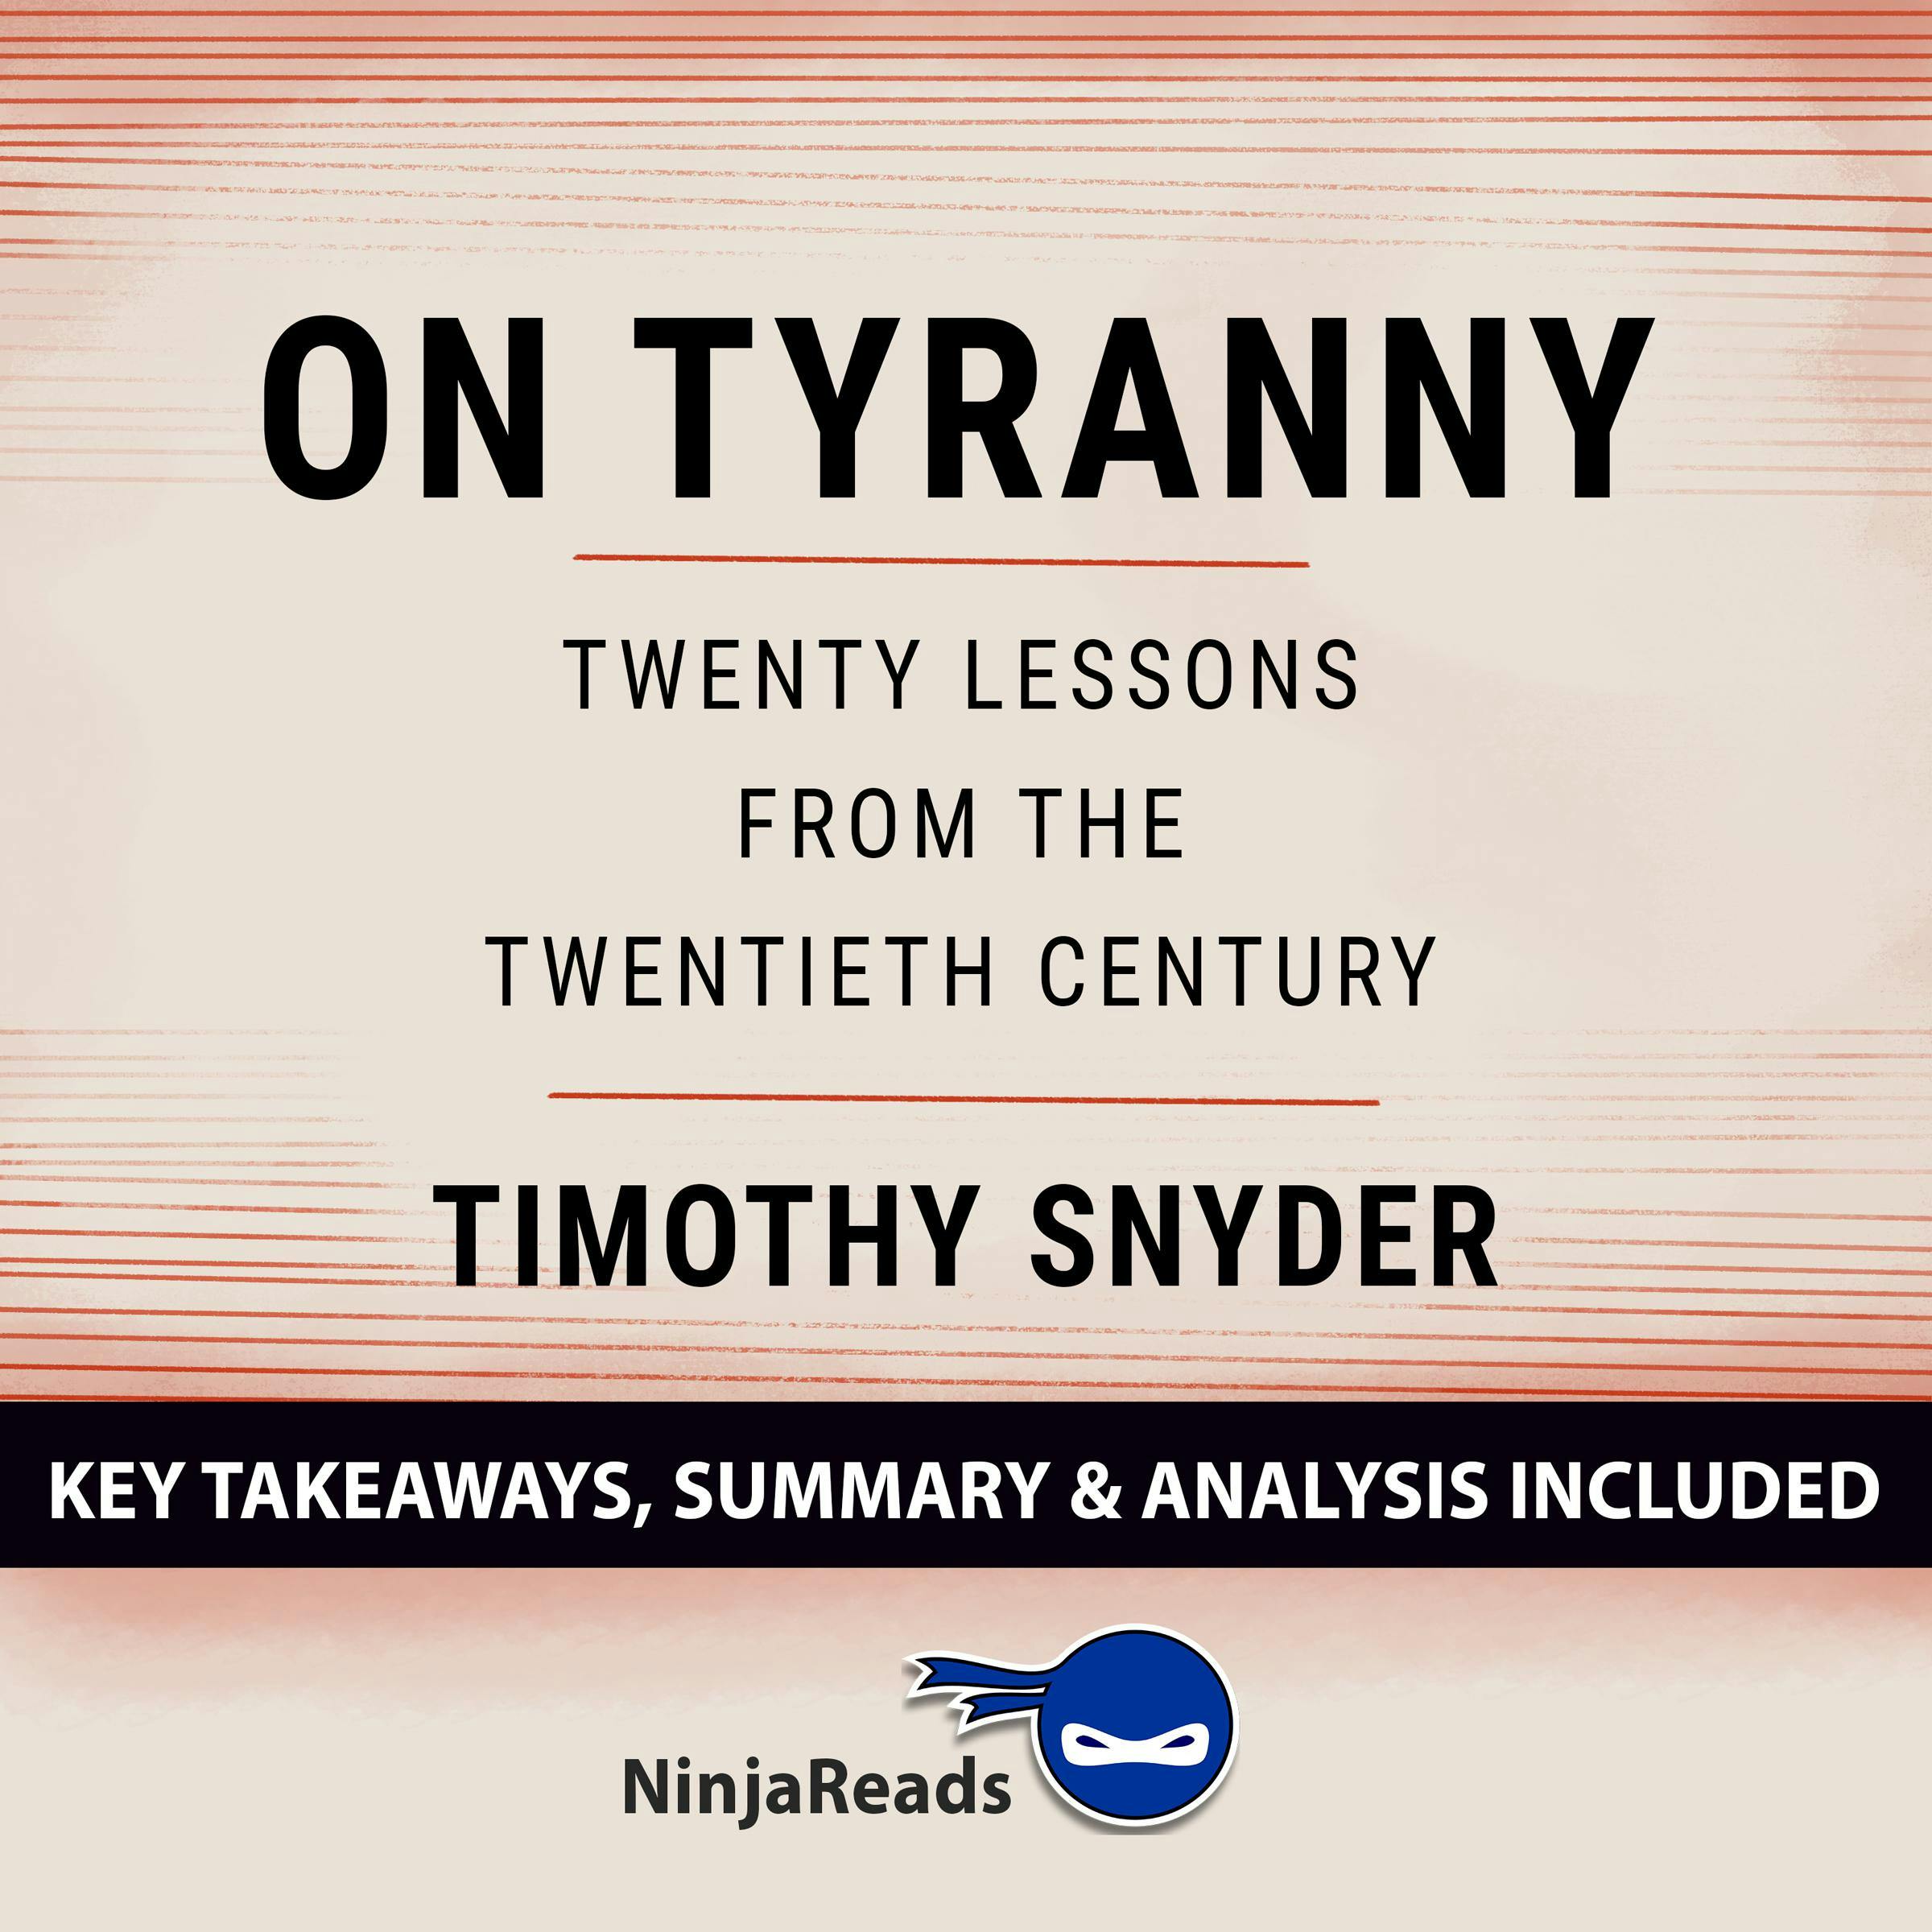 Summary: On Tyranny: Twenty Lessons from the Twentieth Century by Timothy Snyder: Key Takeaways, Summary & Analysis Included - undefined